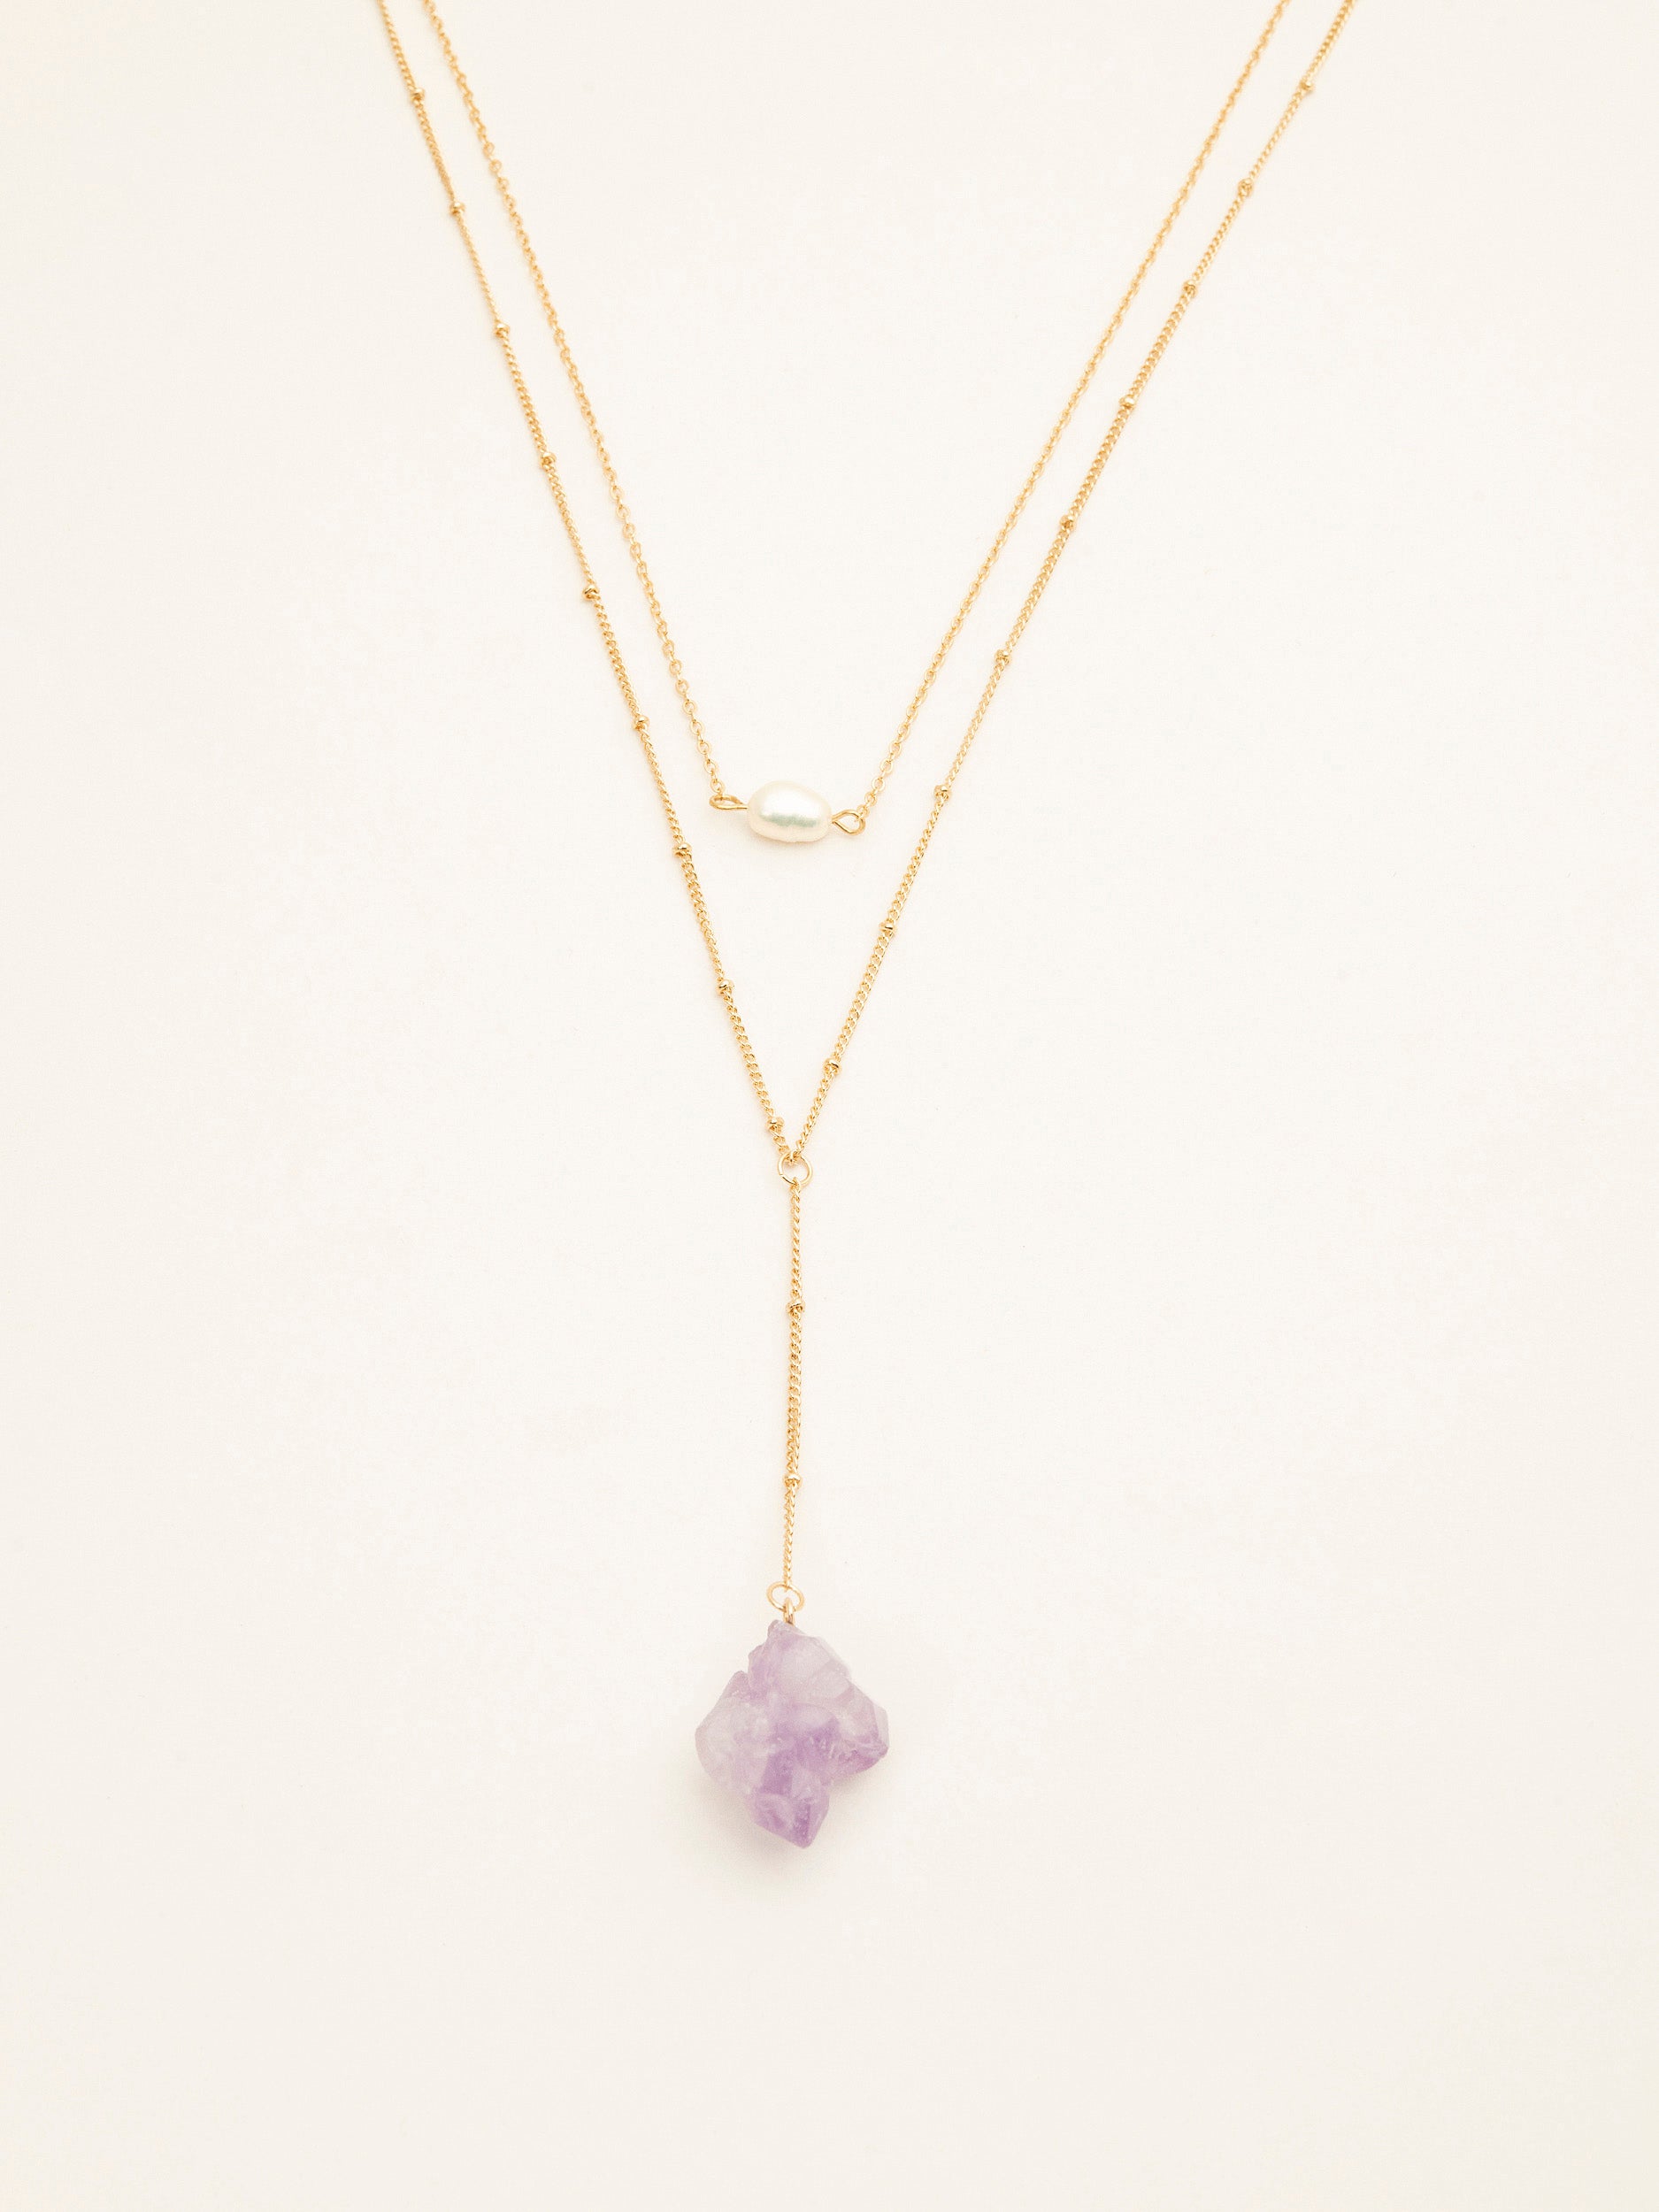 Amethyst Layered Necklace